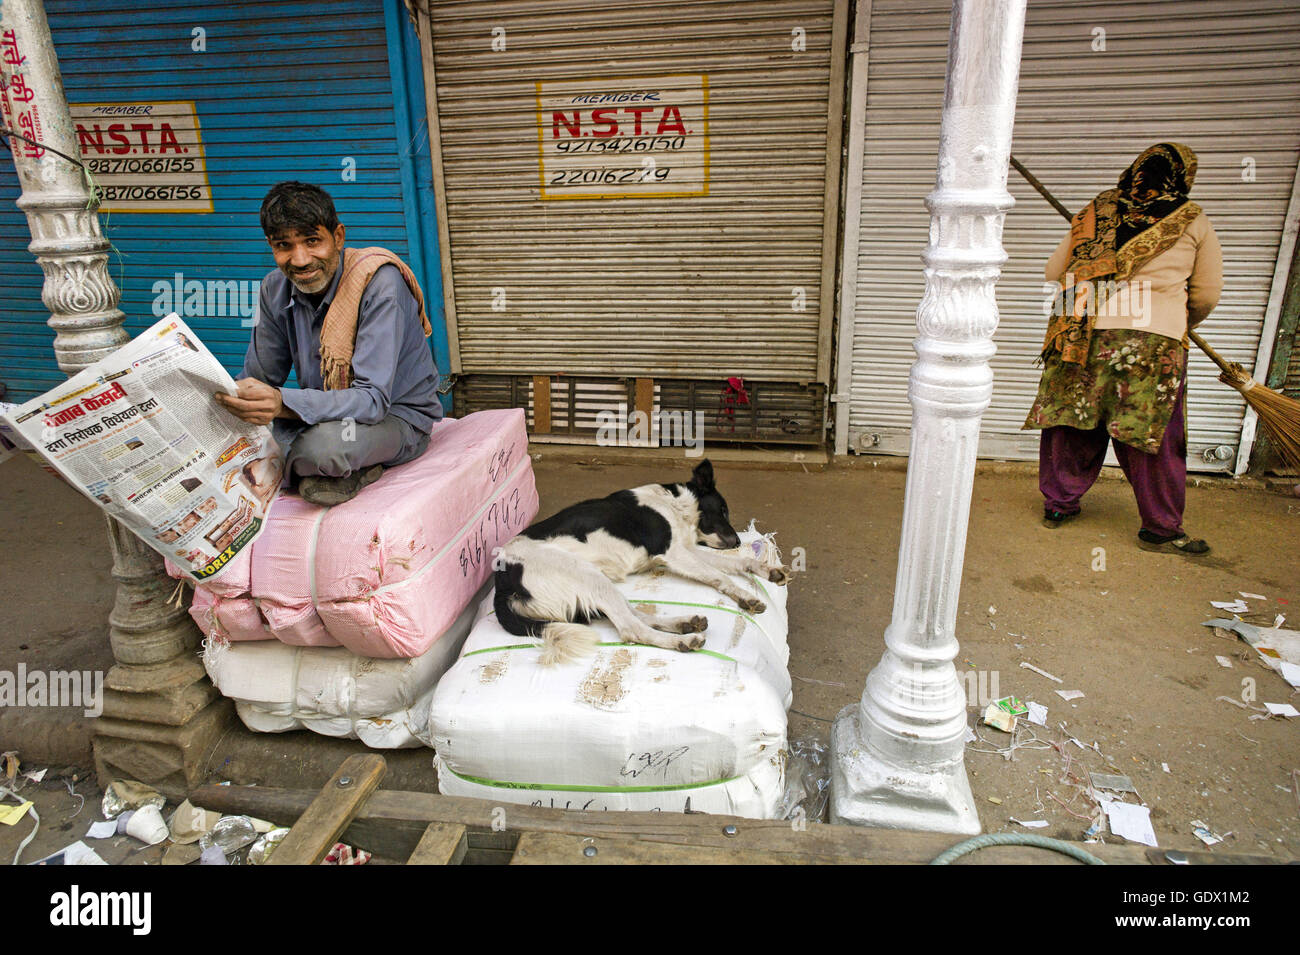 Man reads the newspapers on the street in New Delhi, India, 2014 Stock Photo